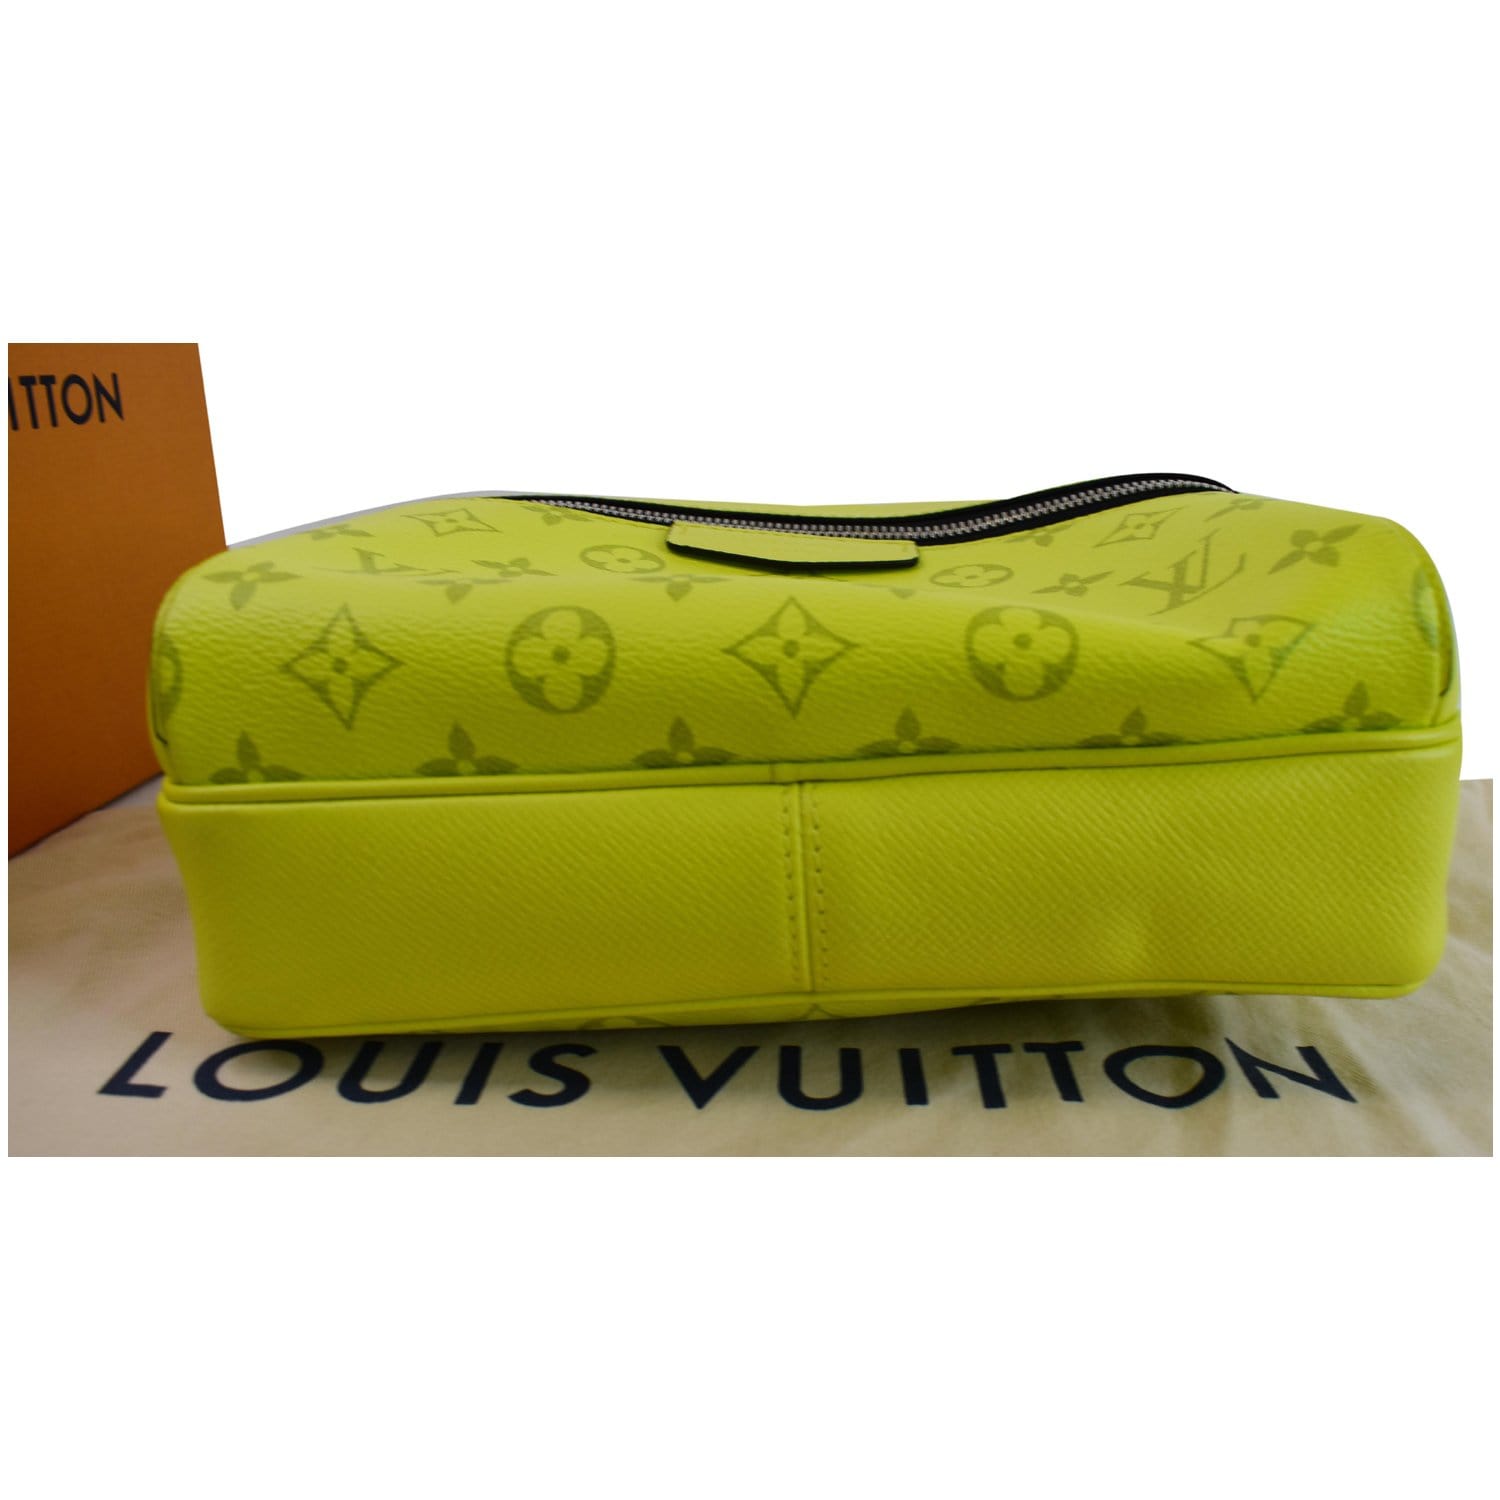 Louis Vuitton Multiple Wallet Miami Green in Monogram Coated Canvas/Taiga  Cowhide Leather - US